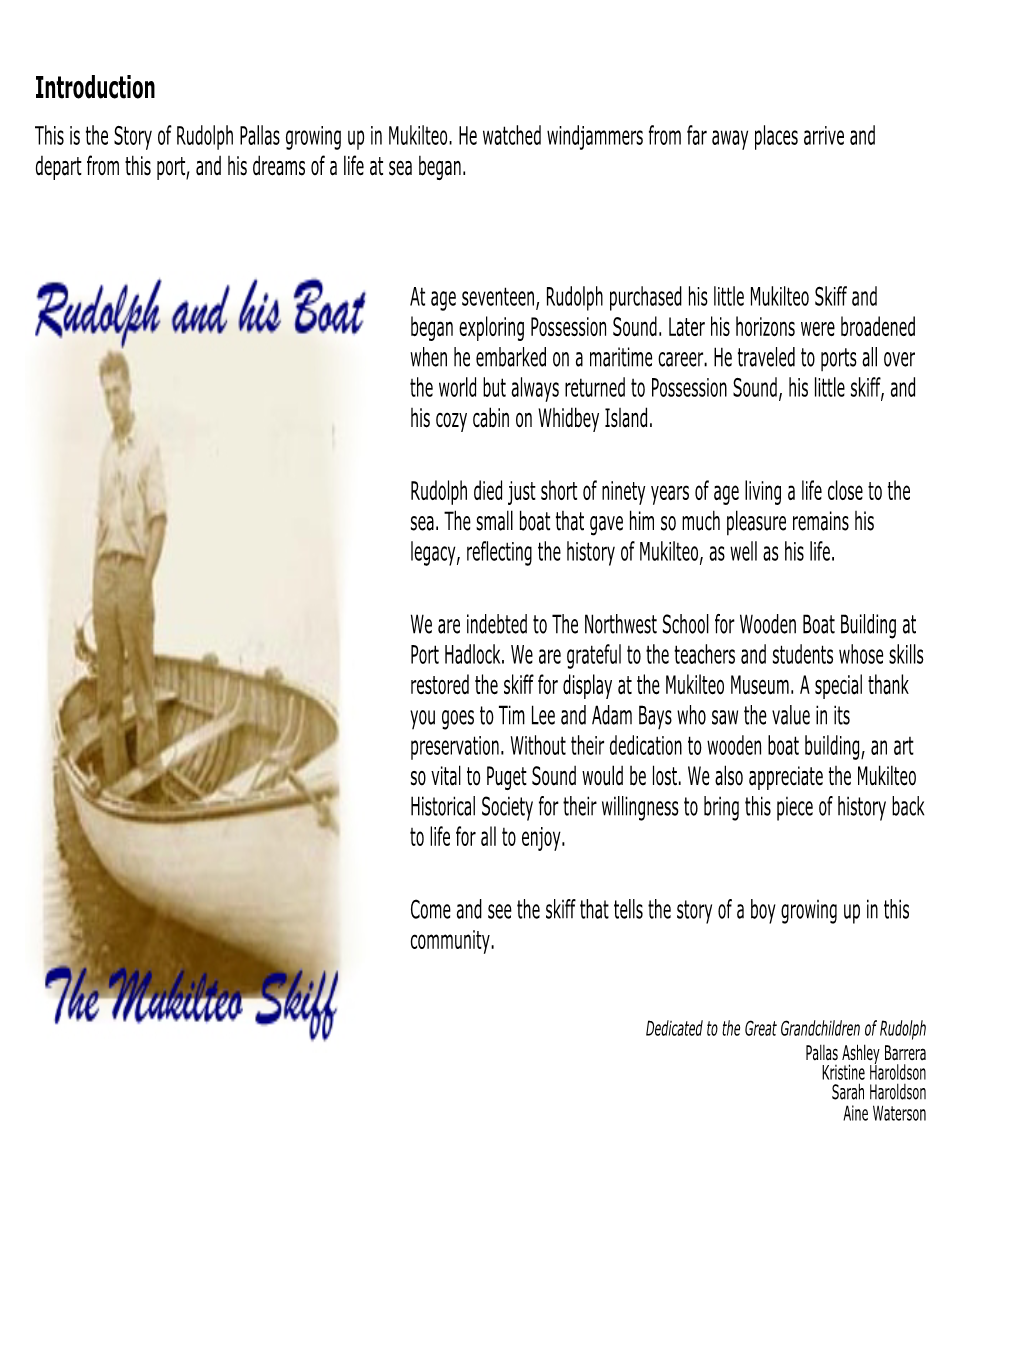 Introduction This Is the Story of Rudolph Pallas Growing up in Mukilteo